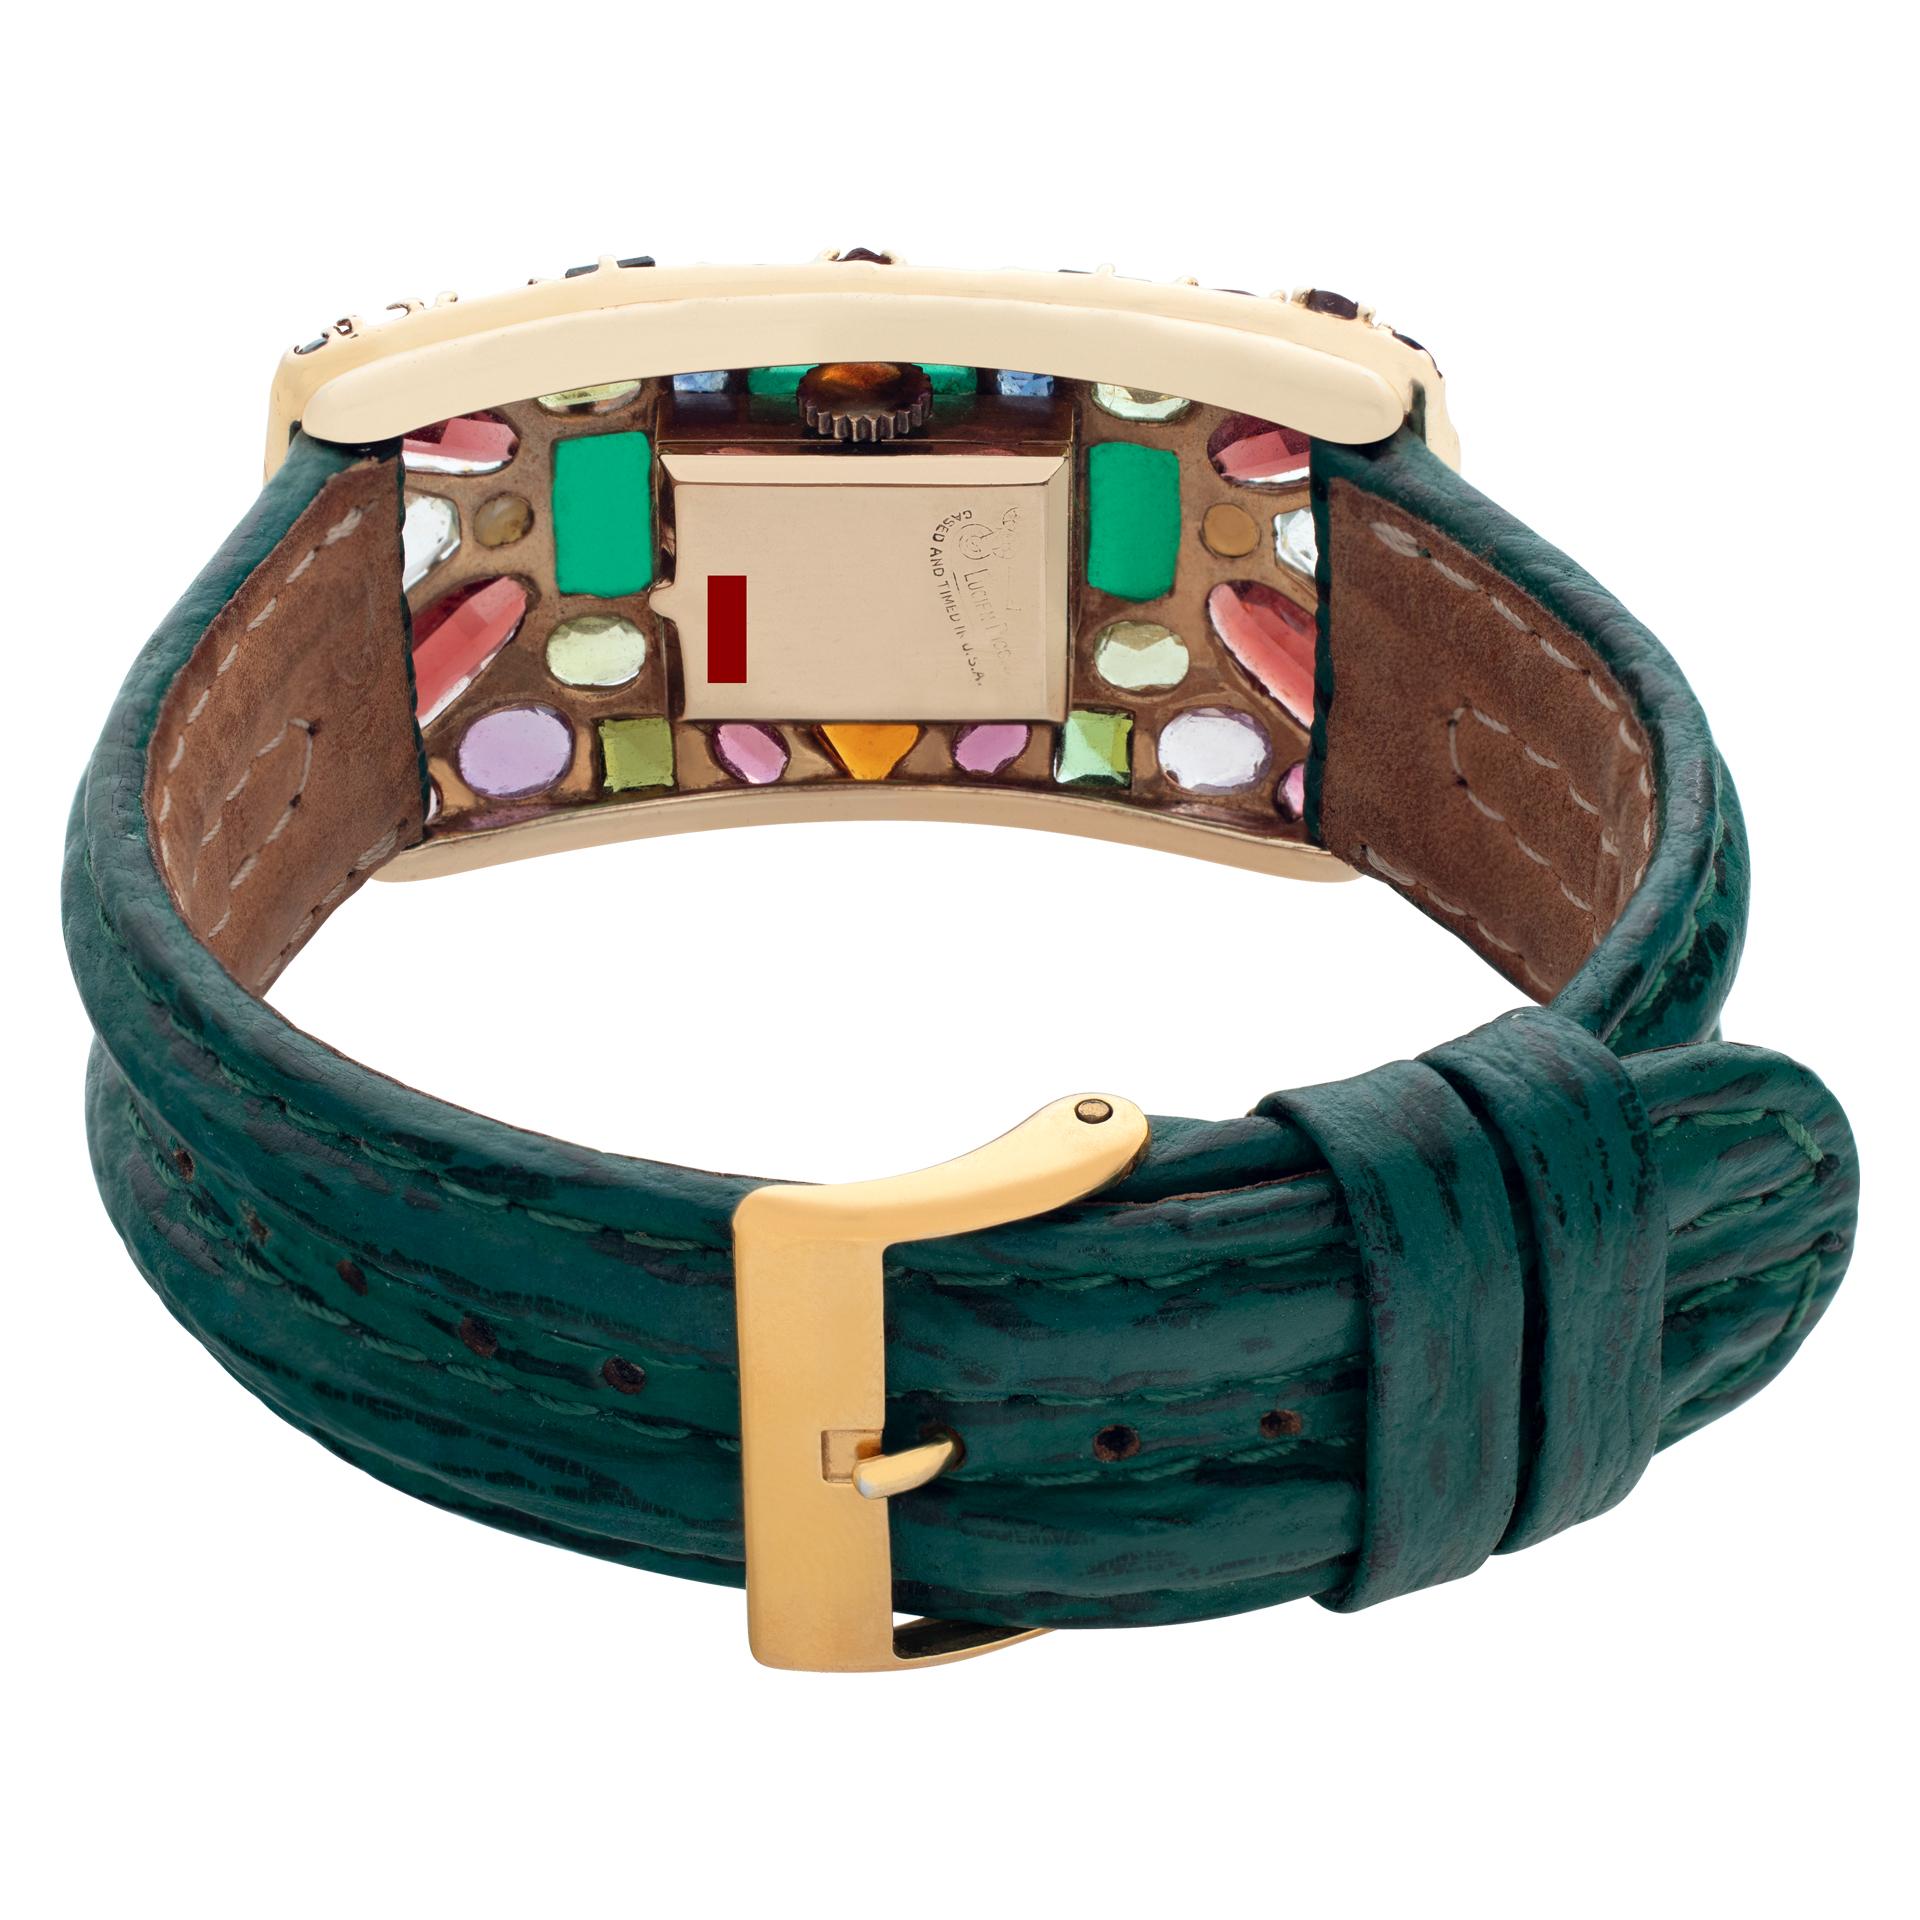 Vintage Swiss Lucien Piccard watch, with mosaic of semi precious stones: green, red garnets, cultured pearls, amethyst, tourmaline and white sapphires on green custom stitched leather strap. Manual wind movement. 26 mm case size. Circa 1960s. Fine